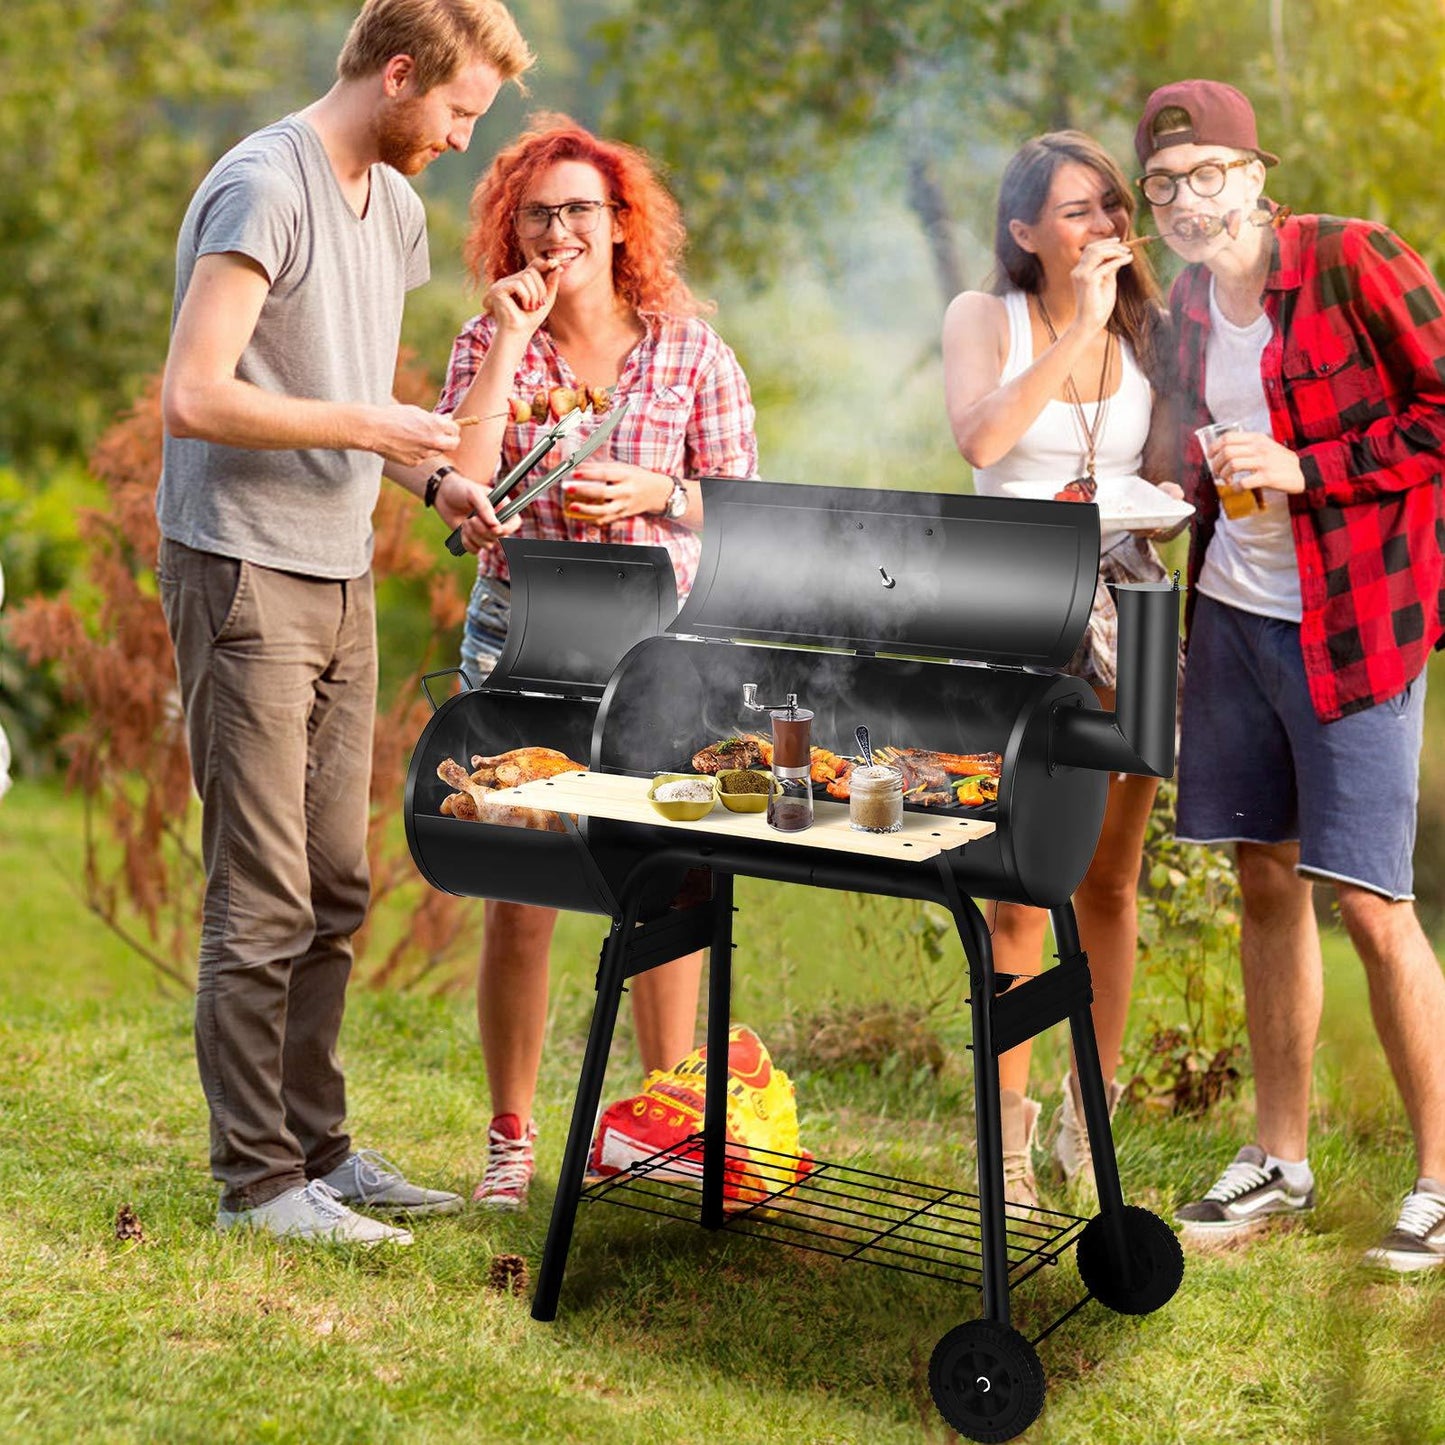 Giantex BBQ Charcoal Grill with Offset Smoker, Thermometer and Adjustable Damper, Meat Cooker Smoker for Backyard Family Gathering and Outdoor Picnic, 2 Moveable Wheels, 2 Shelves and Wooden Handles - CookCave